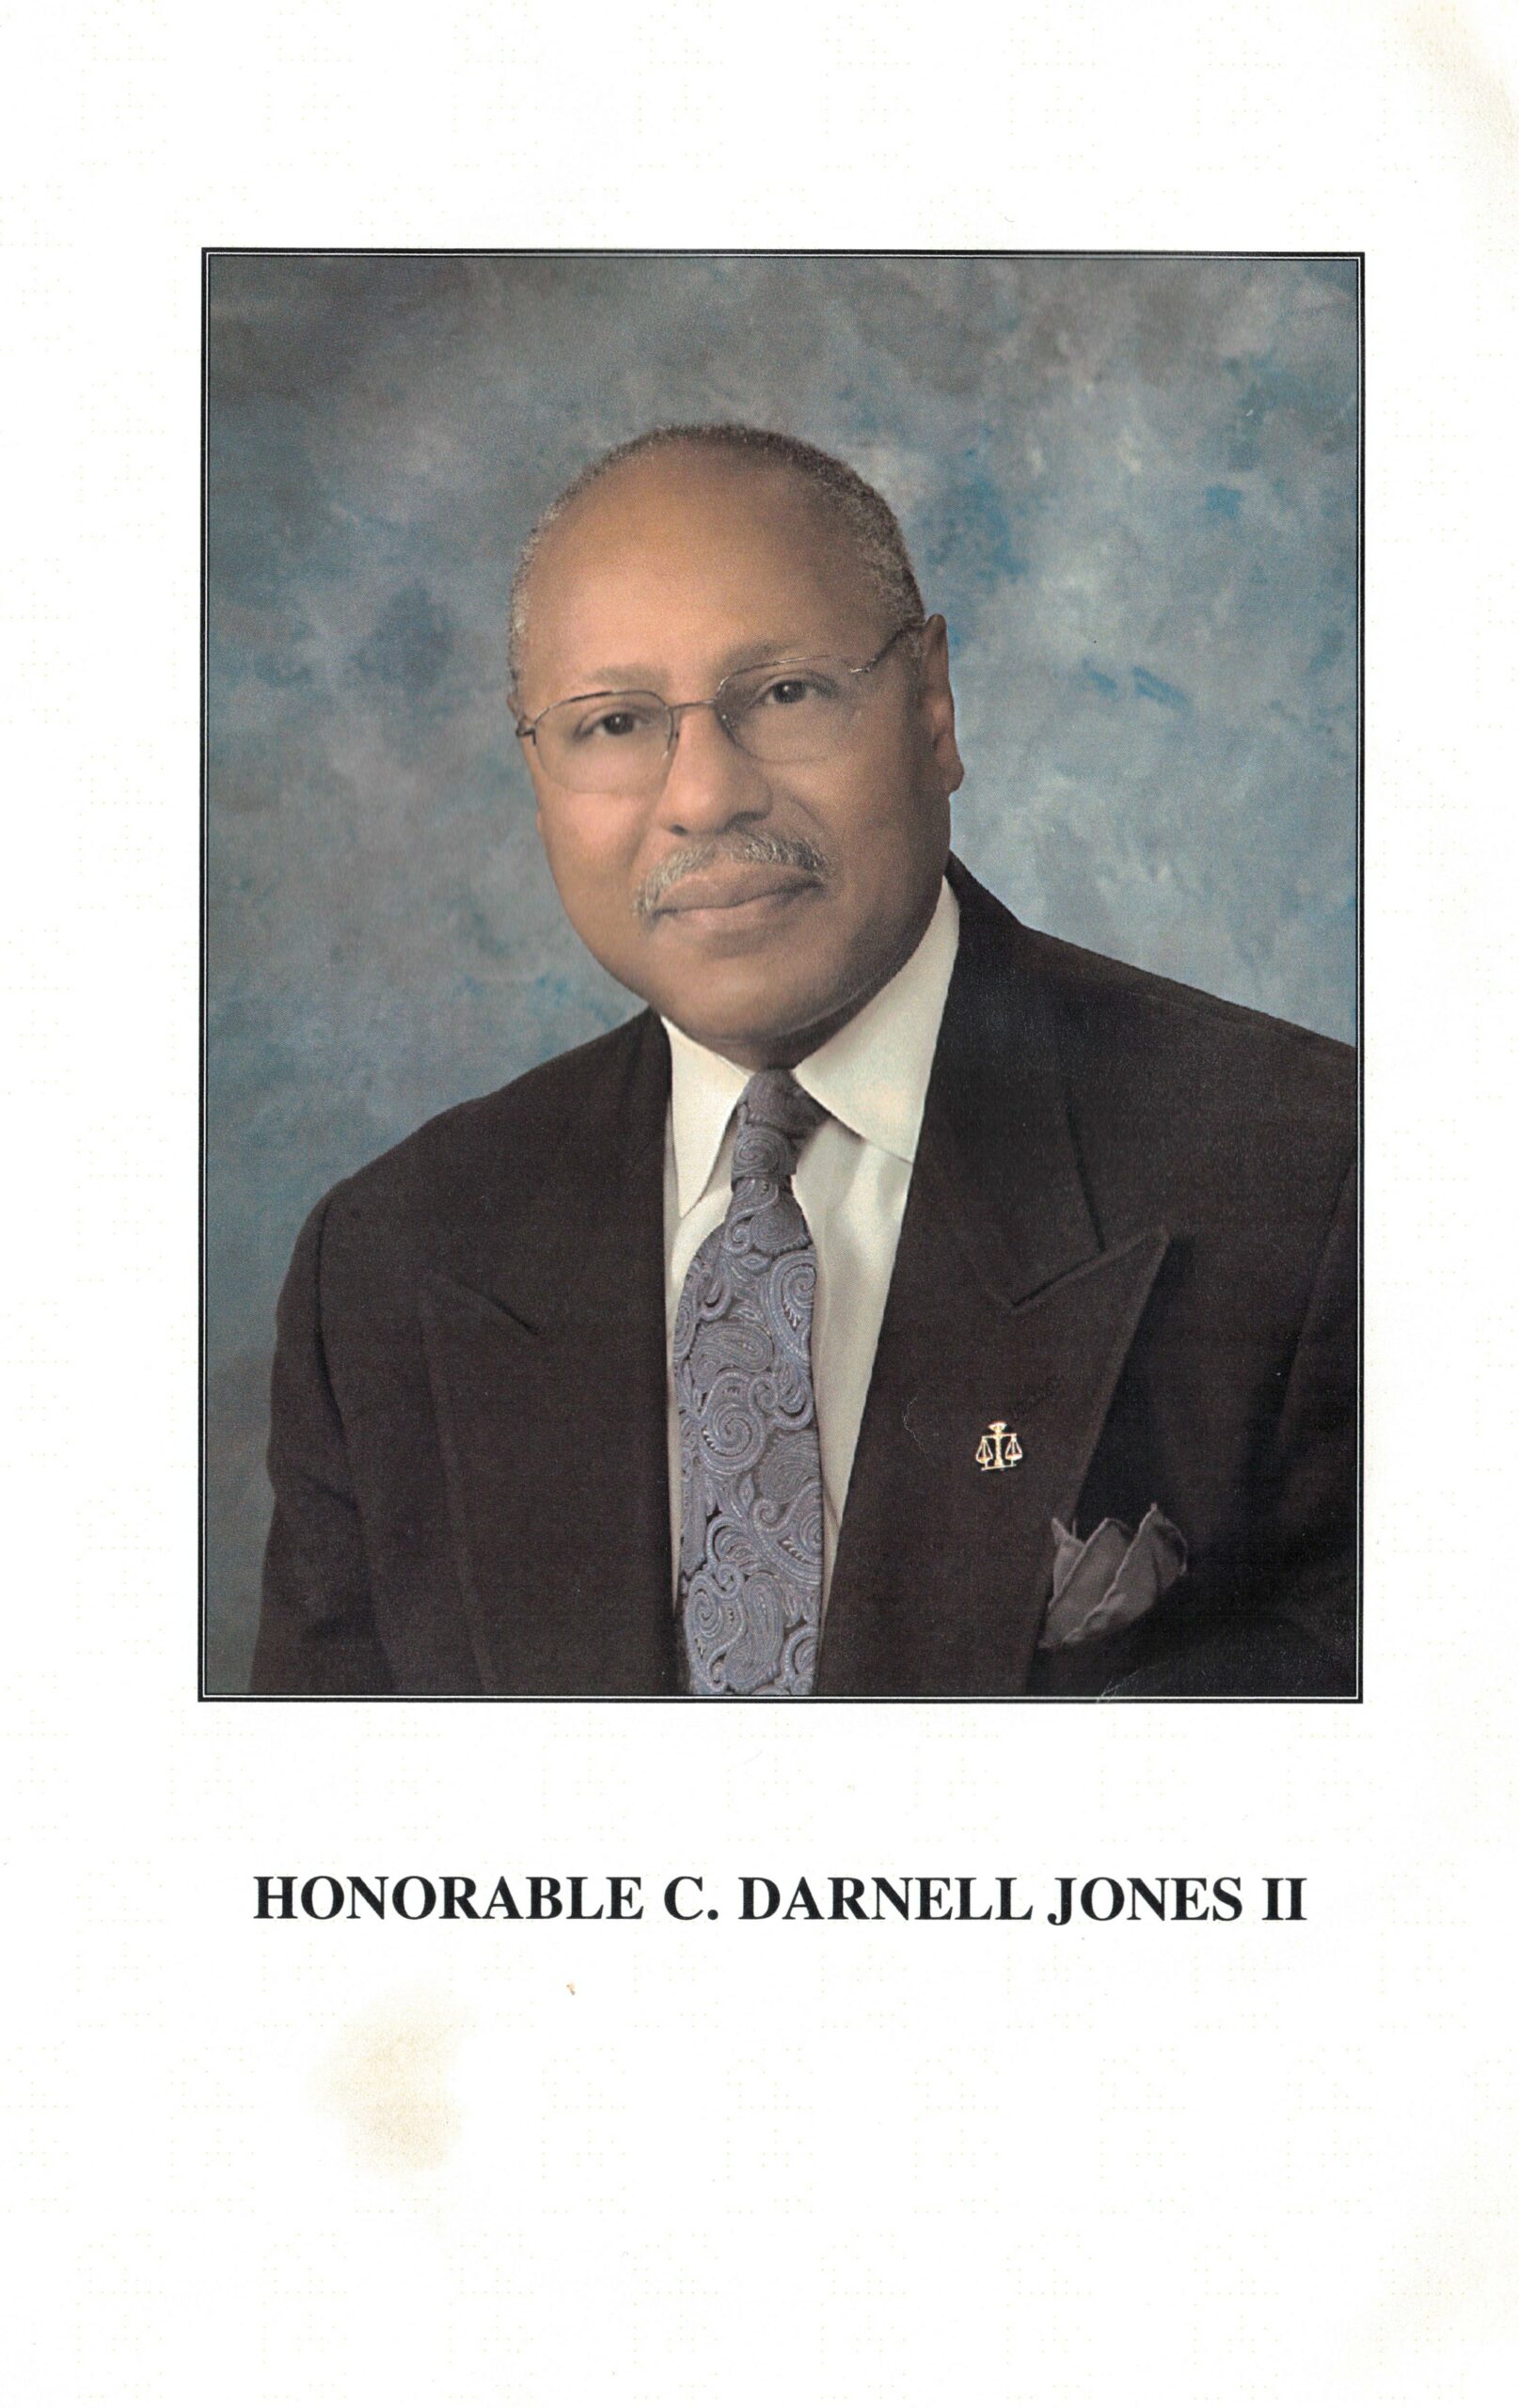 Fifth page of the Jones program pamphlet with photo and text.